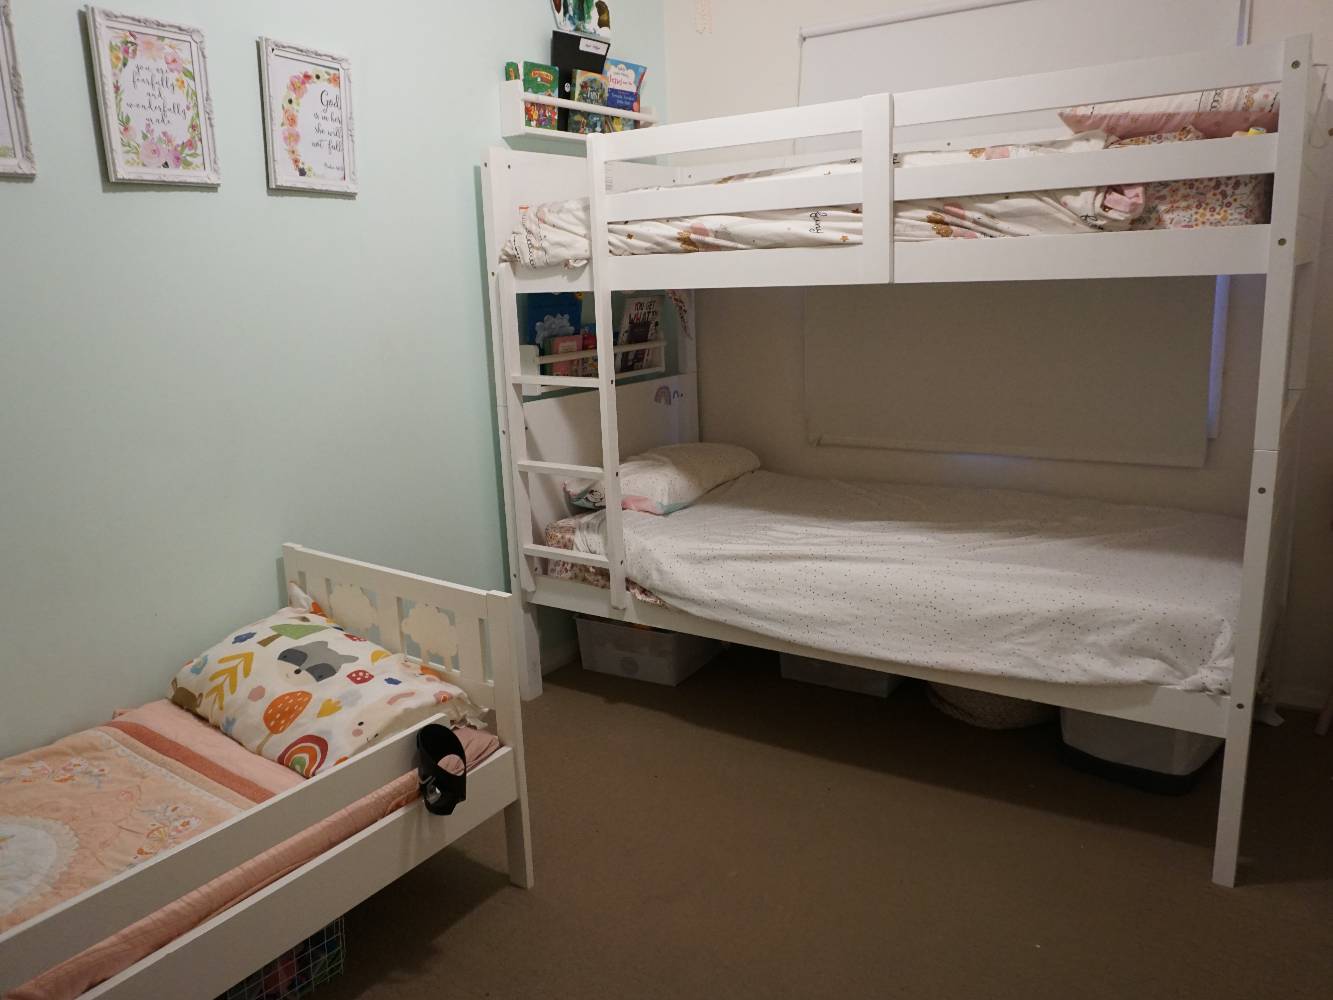 2nd bedroom. standard single bed size bunks and removable toddler bed